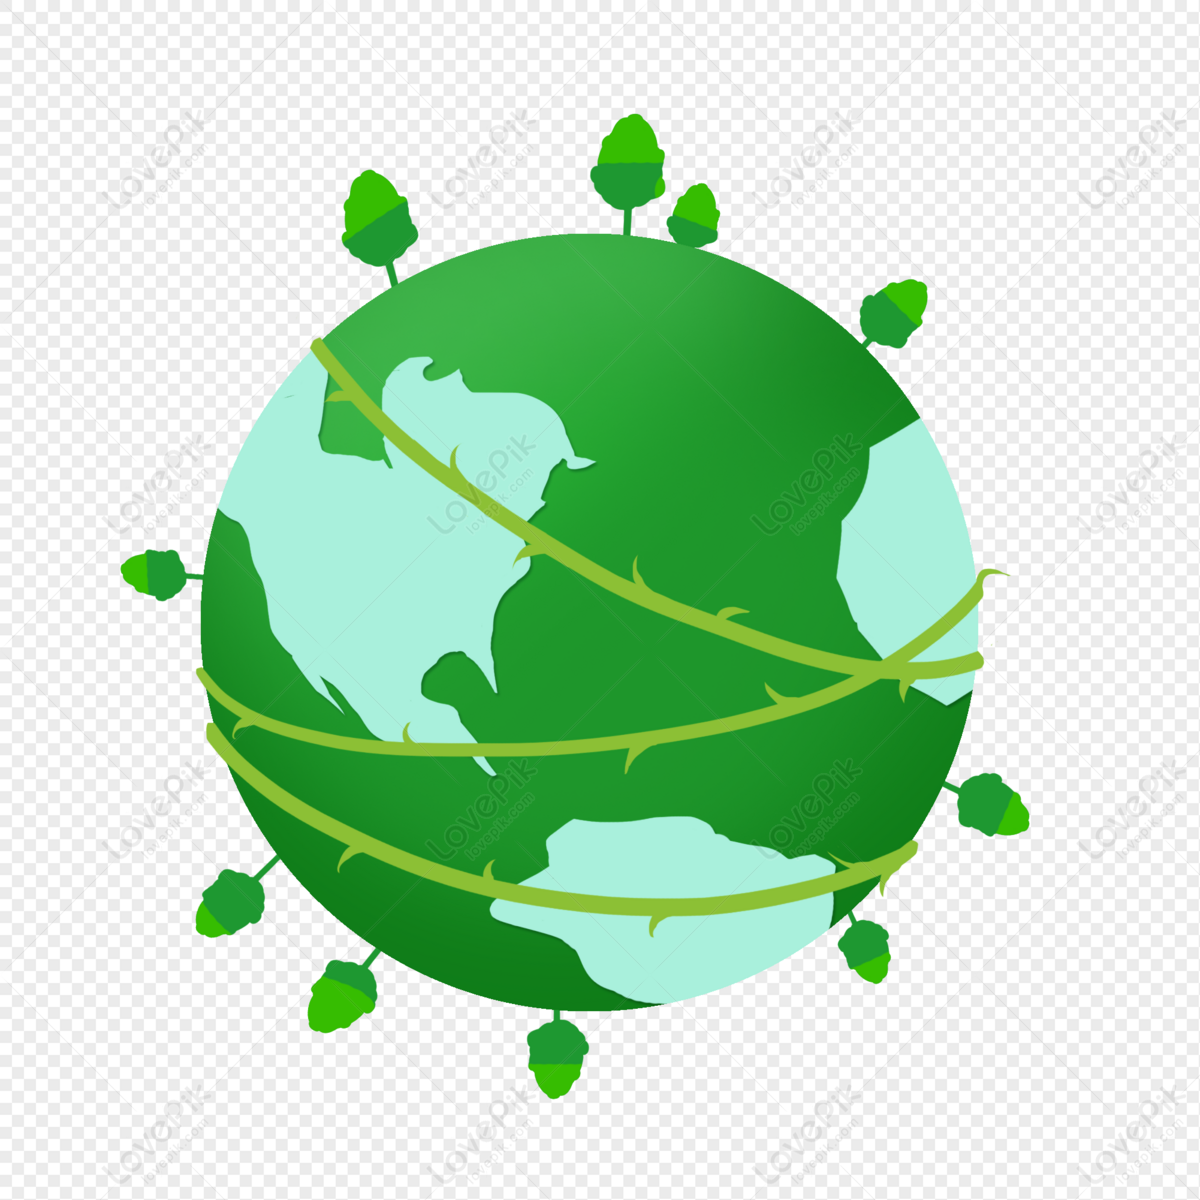 Environmentally Friendly Green Earth PNG Transparent Background And Clipart  Image For Free Download - Lovepik | 401321210